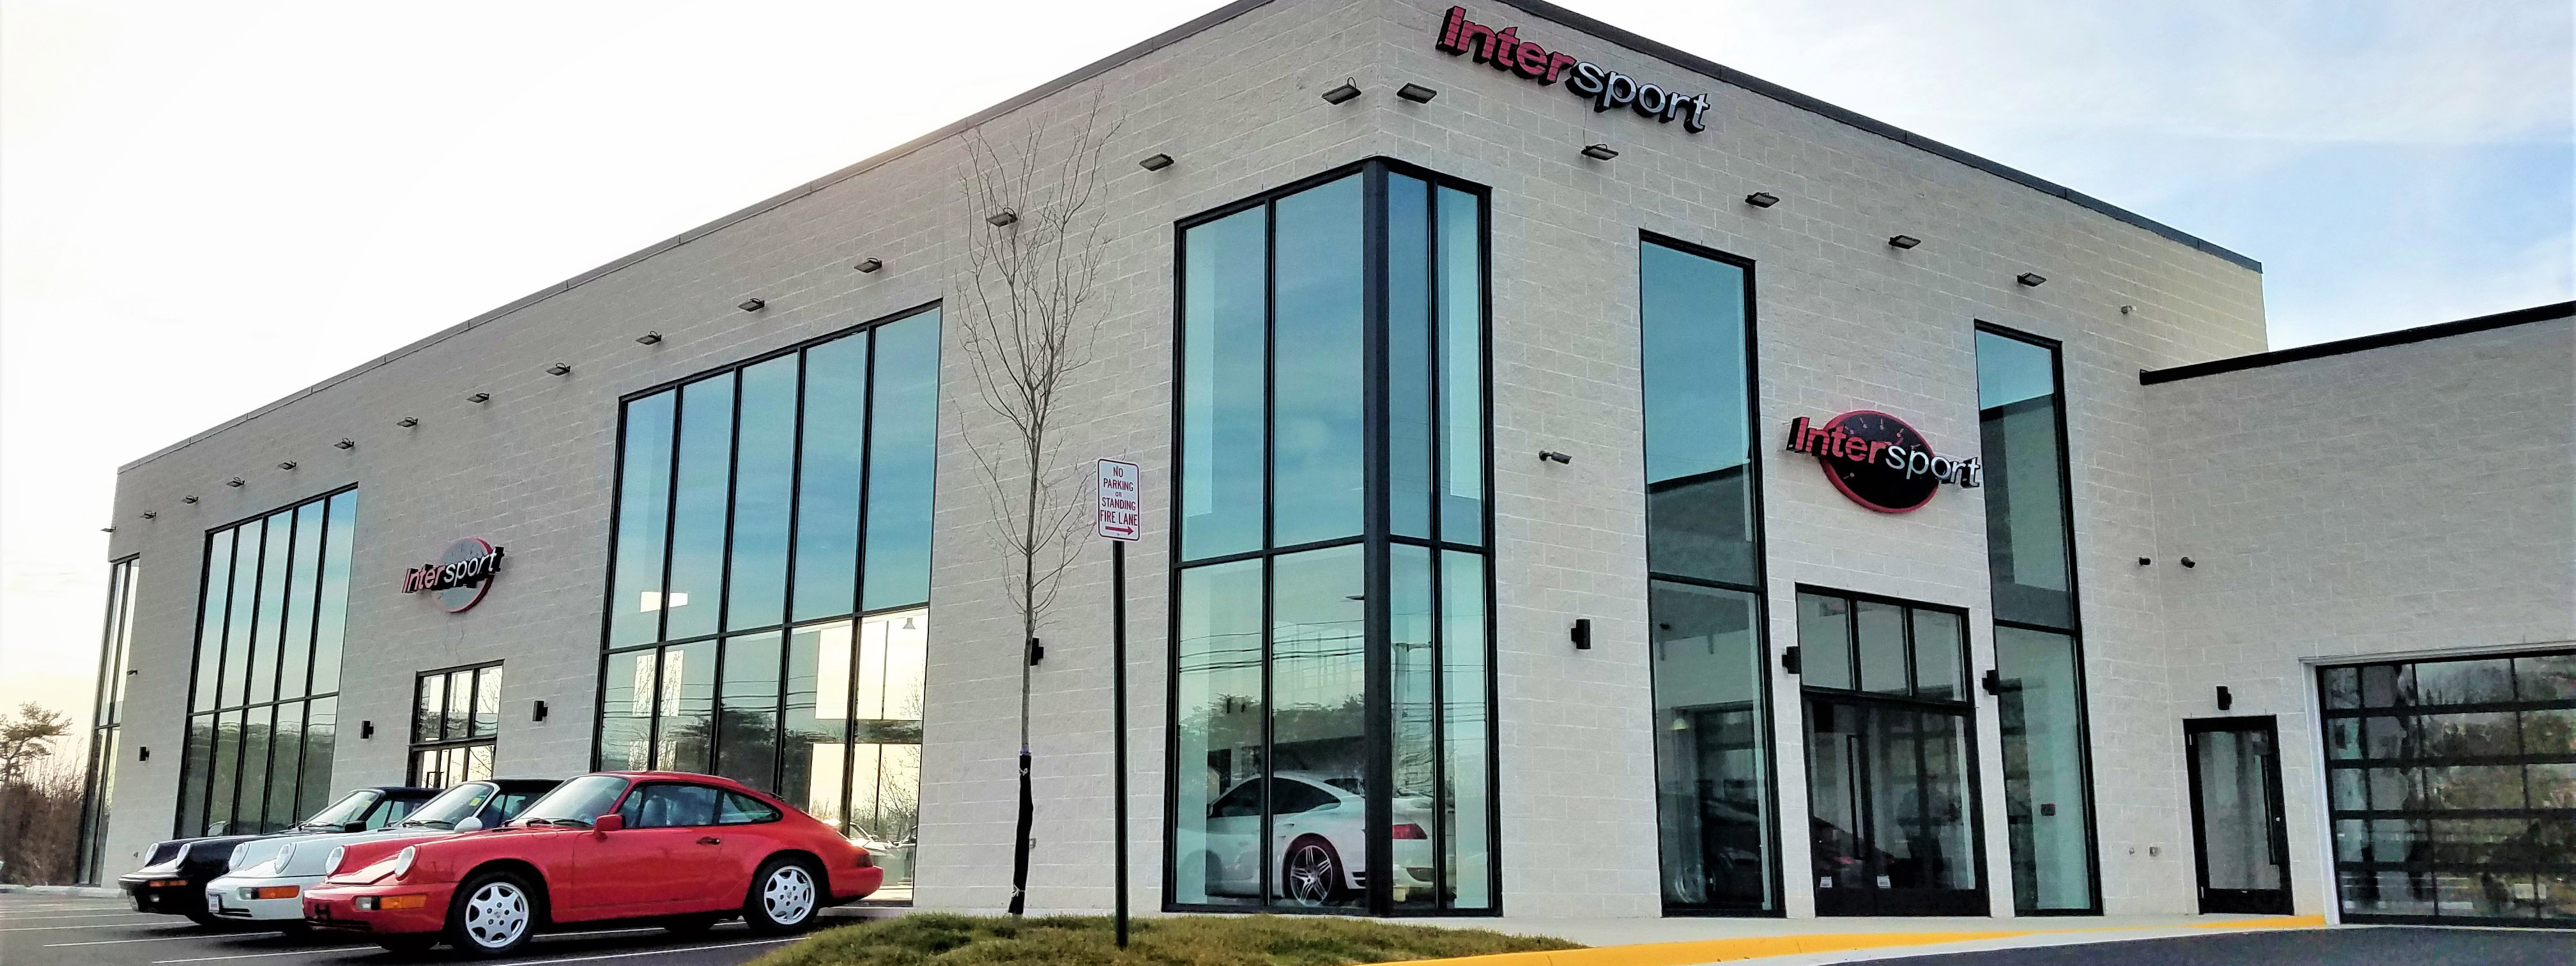 European car dealer for pre-owned sports cars and luxury vehicles in Ashburn VA. We sell and service Audi, Aston-Martin, Bentley, BMW, Mercedes-Benz, Jaguar, Porsche, Lamborghini, Land Rover,  Maserati and more. 